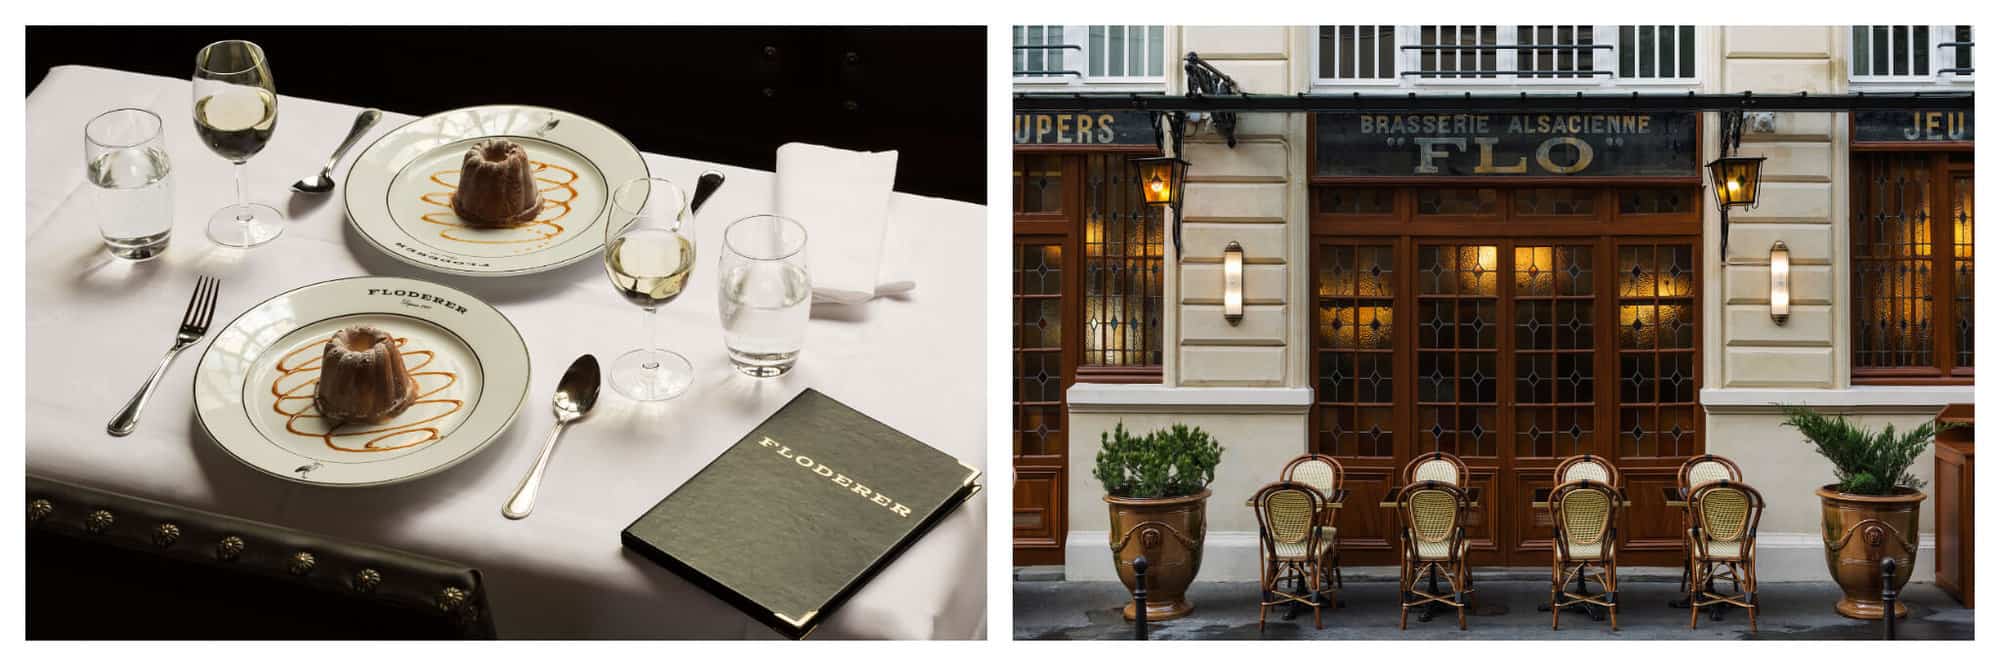 left: dessert plated and laid on a white table cloth at floderer. right: the exterior terrace of floderer